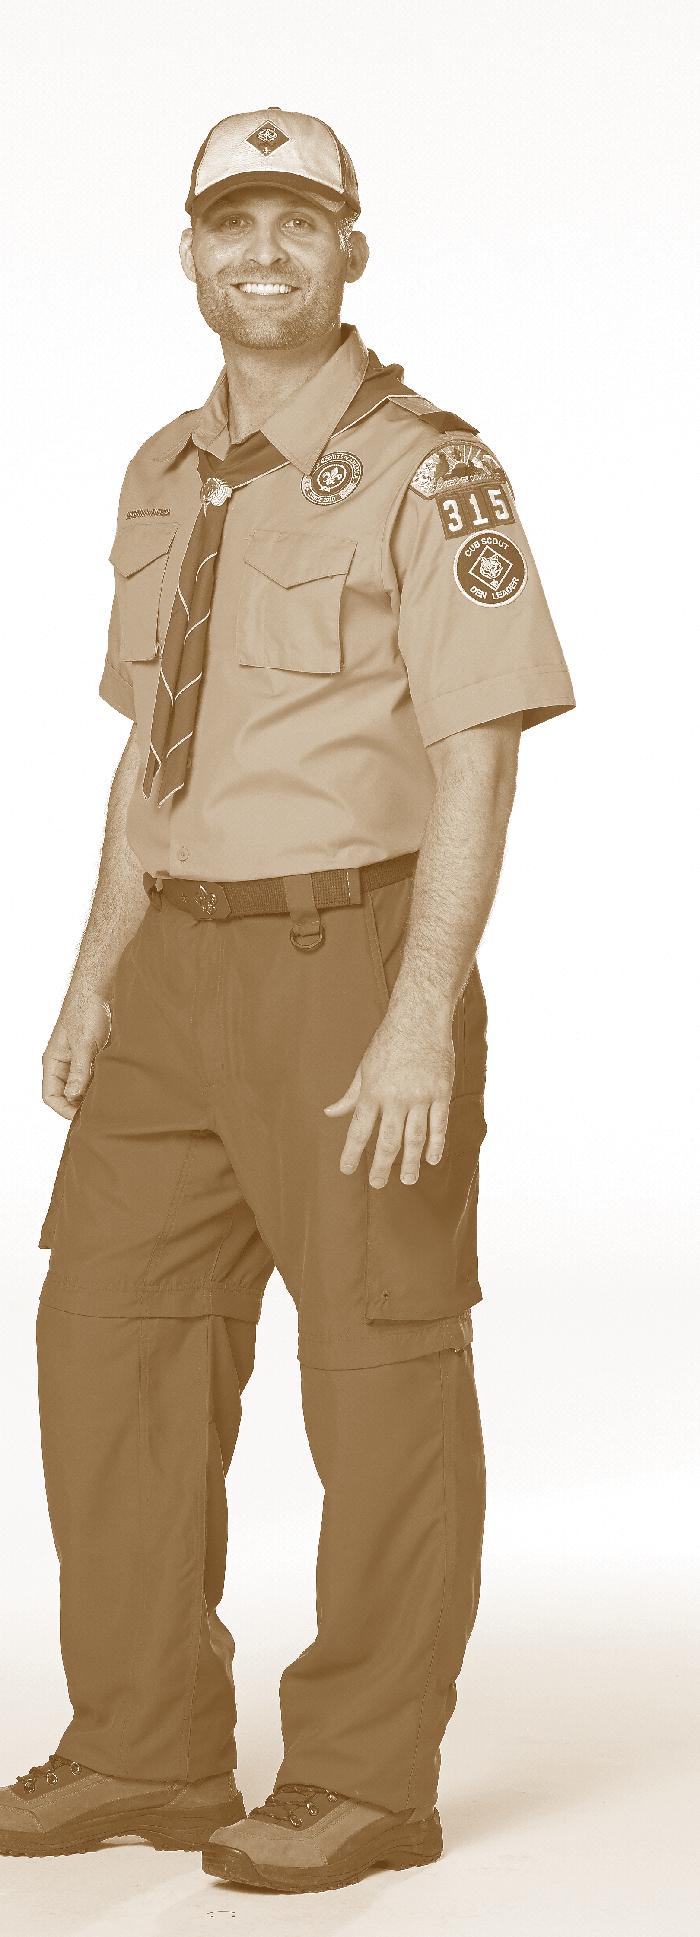 n Male Cub Scout and Boy Scout leaders wear the long- or short-sleeve uniform shirt.